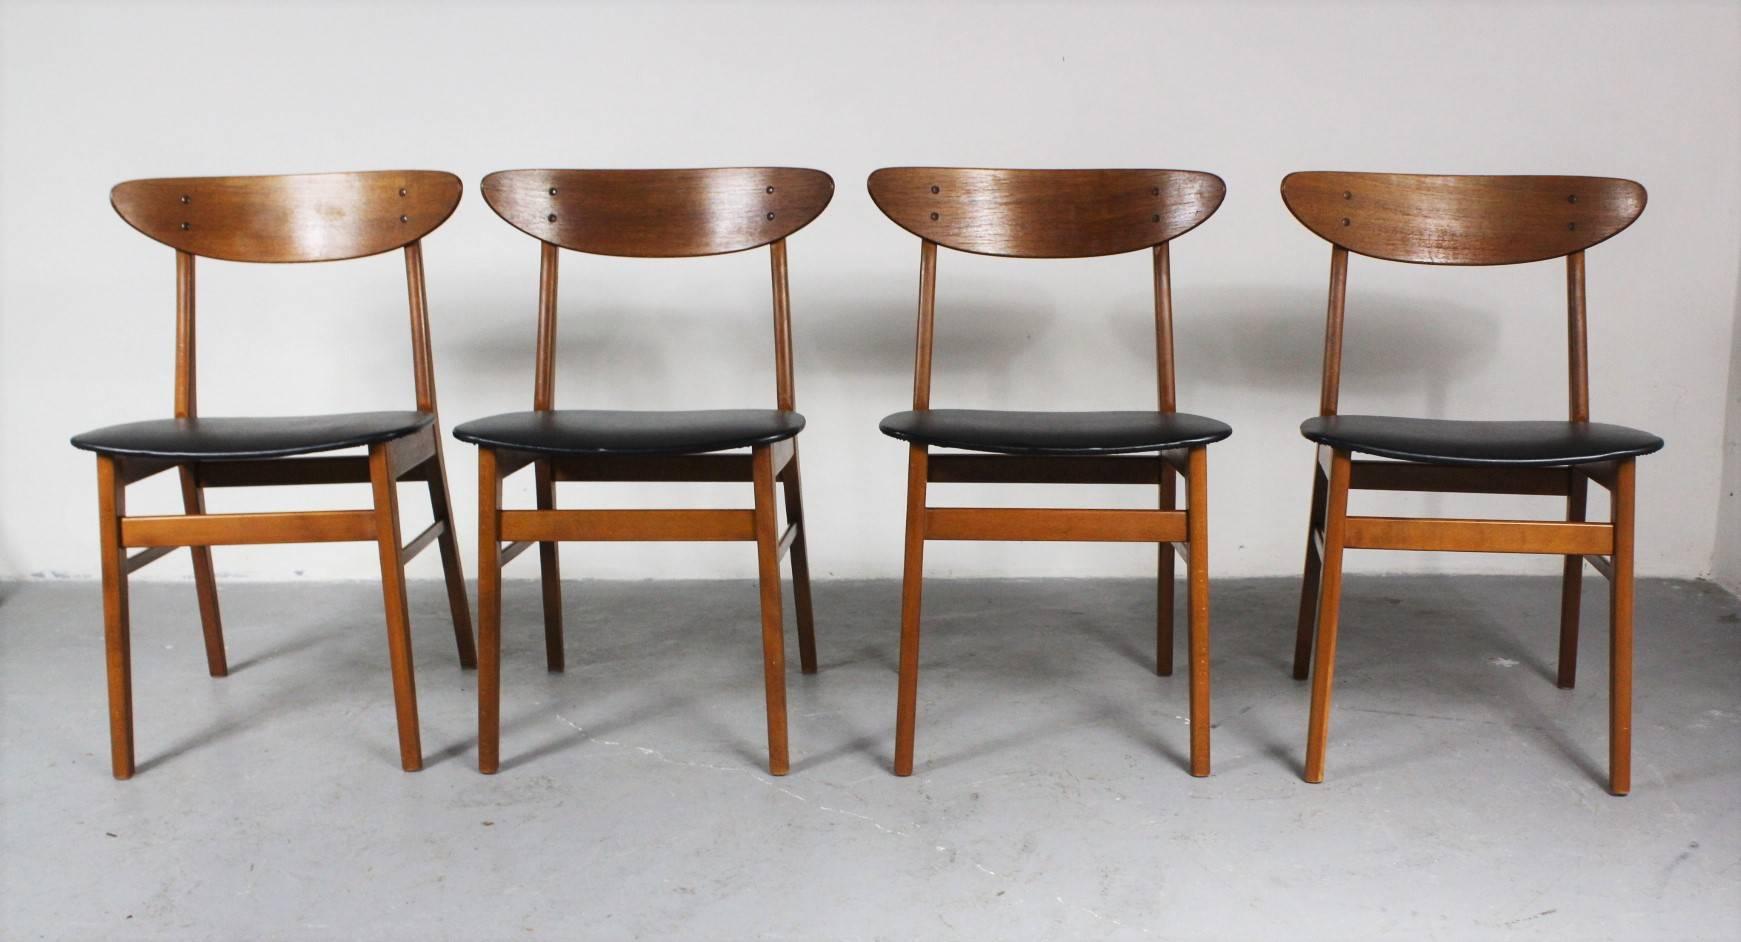 Set of four dining chairs from the 1960s from Denmark. Material is teak and beech, upholstered with faux leather. Chairs are in very good condition.